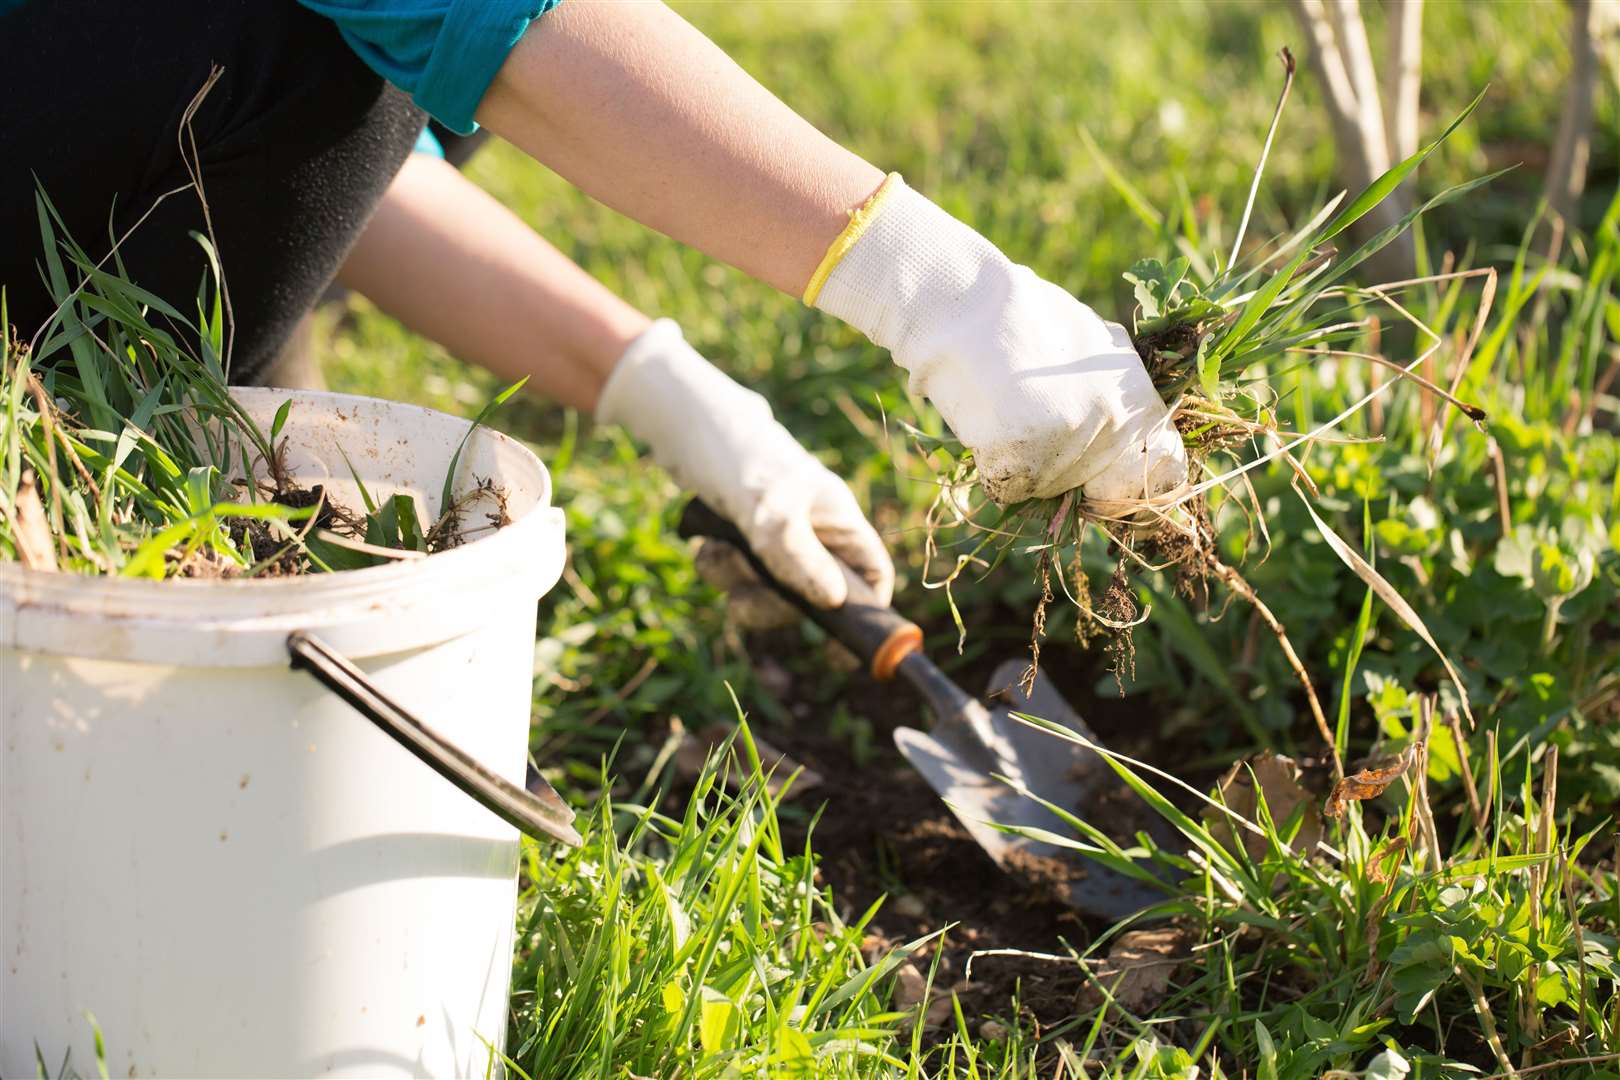 Something as simple as weeding in the garden can be good for your health and wellbeing.